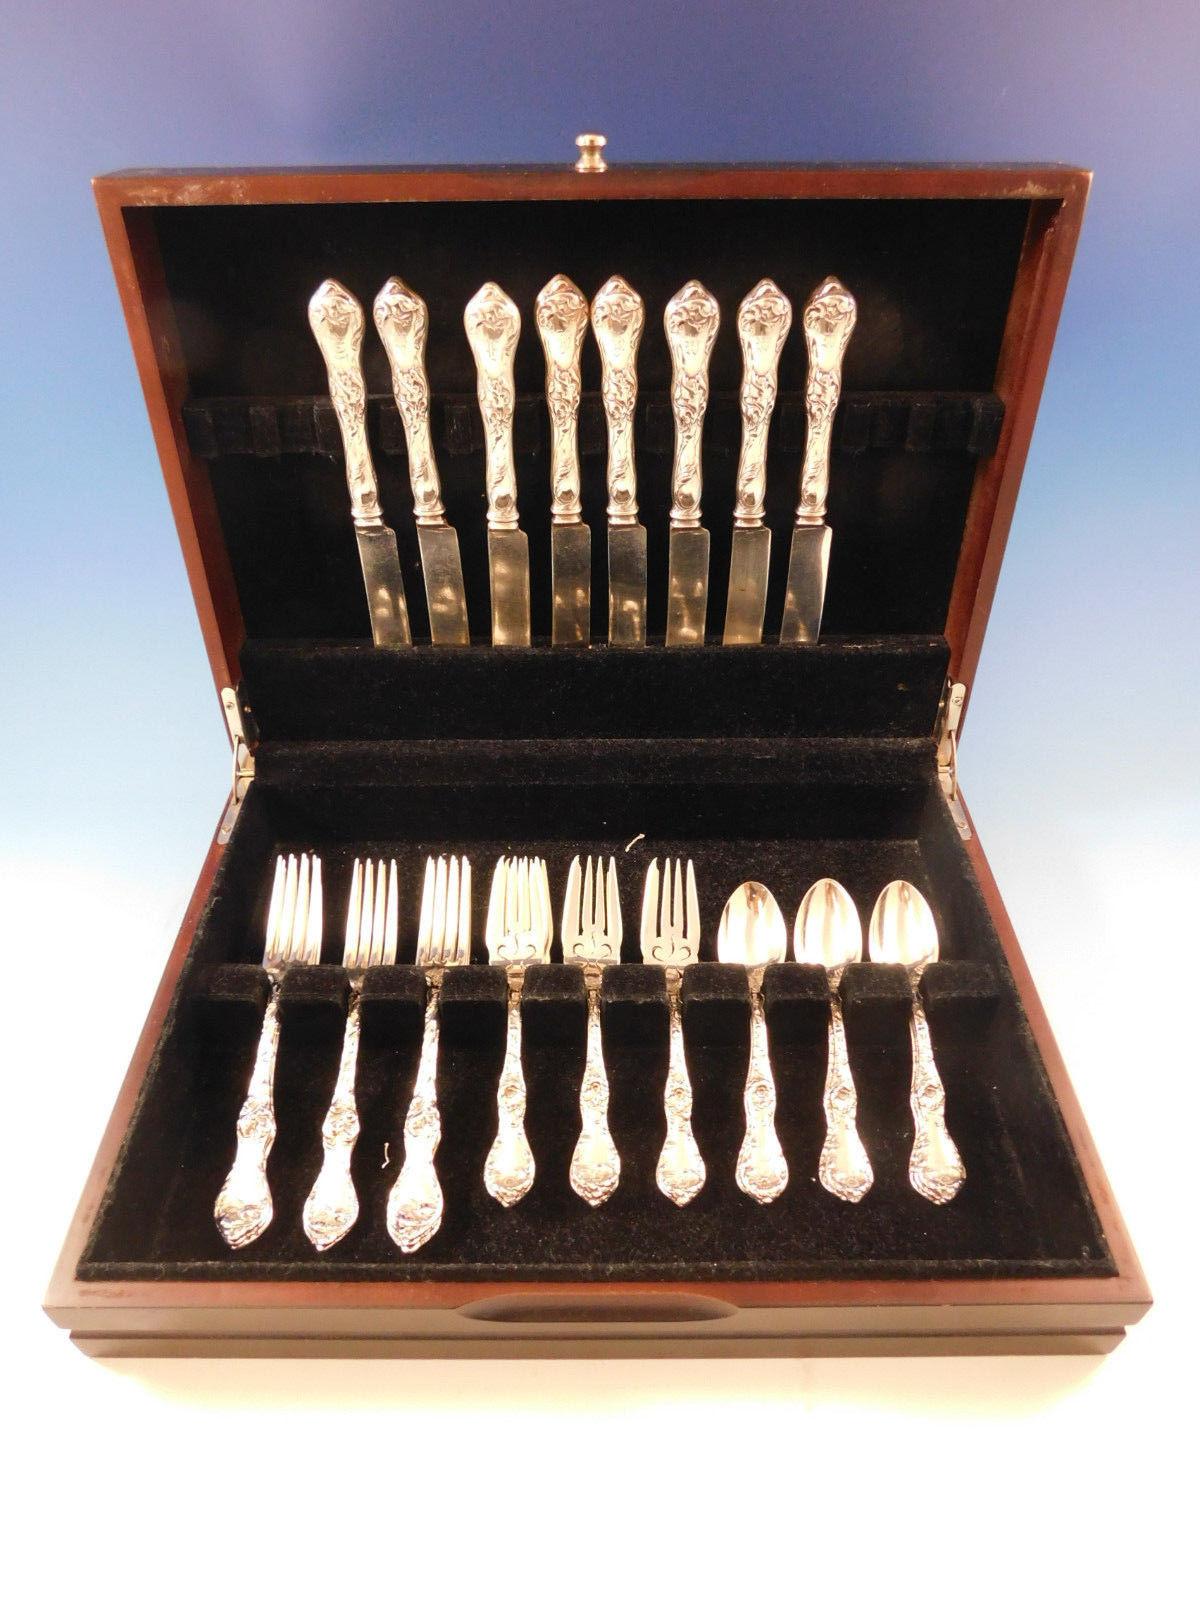 Les Cinq Fleurs by Reed & Barton multi-motif floral sterling silver flatware set, 32 pieces. This set includes:

Eight knives, 9